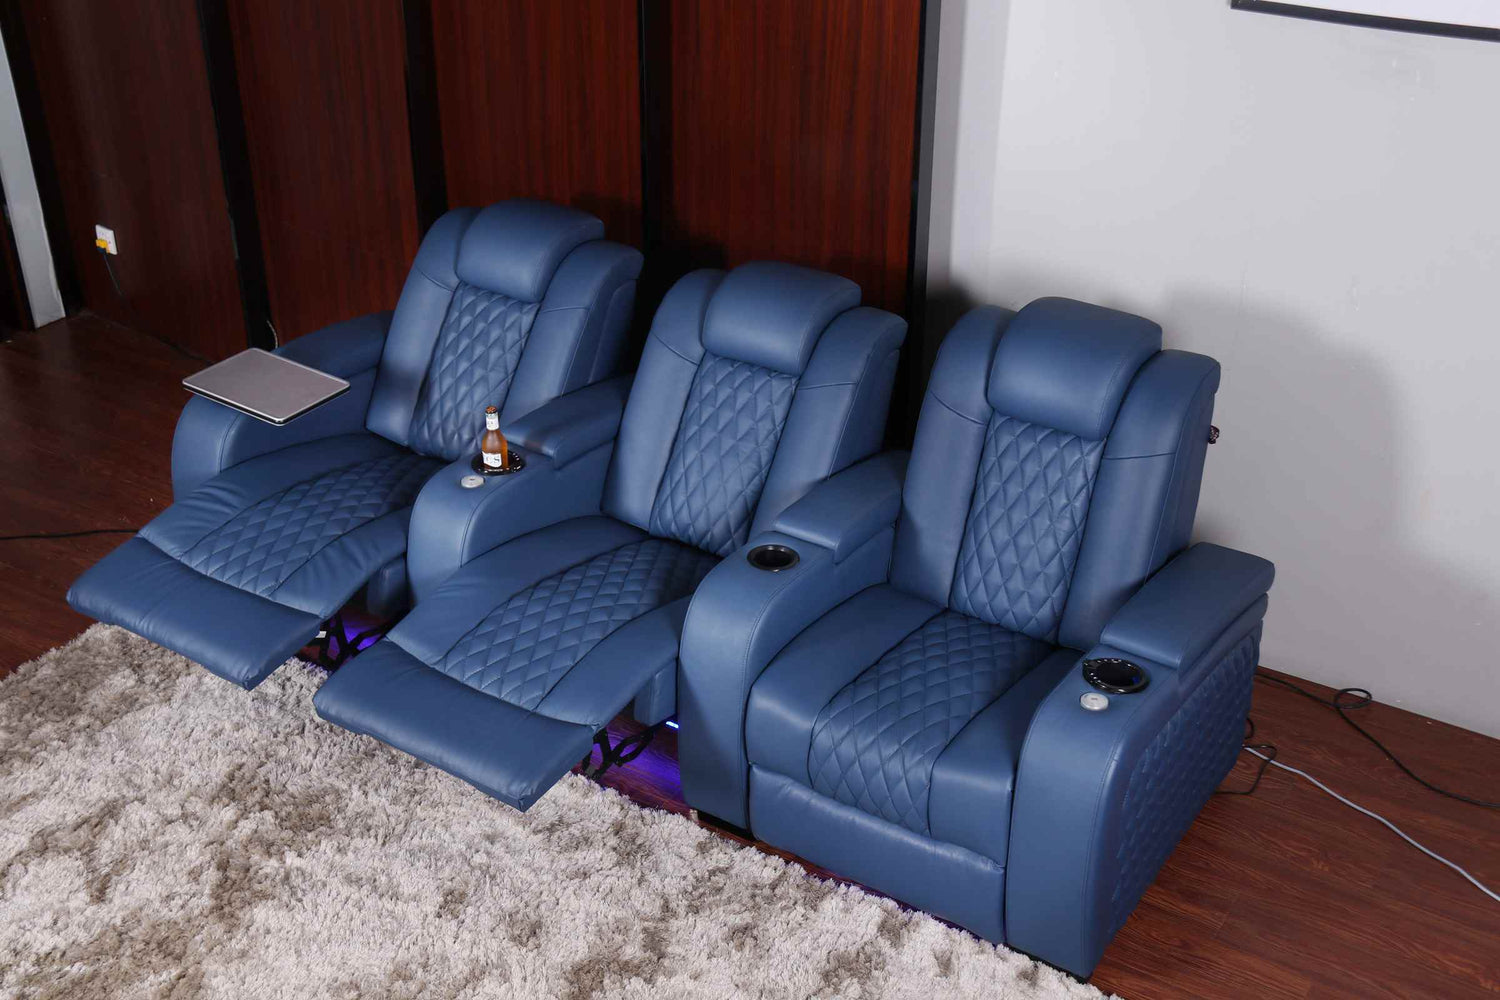 Modern Home Theater Seating: Features and Design Principles